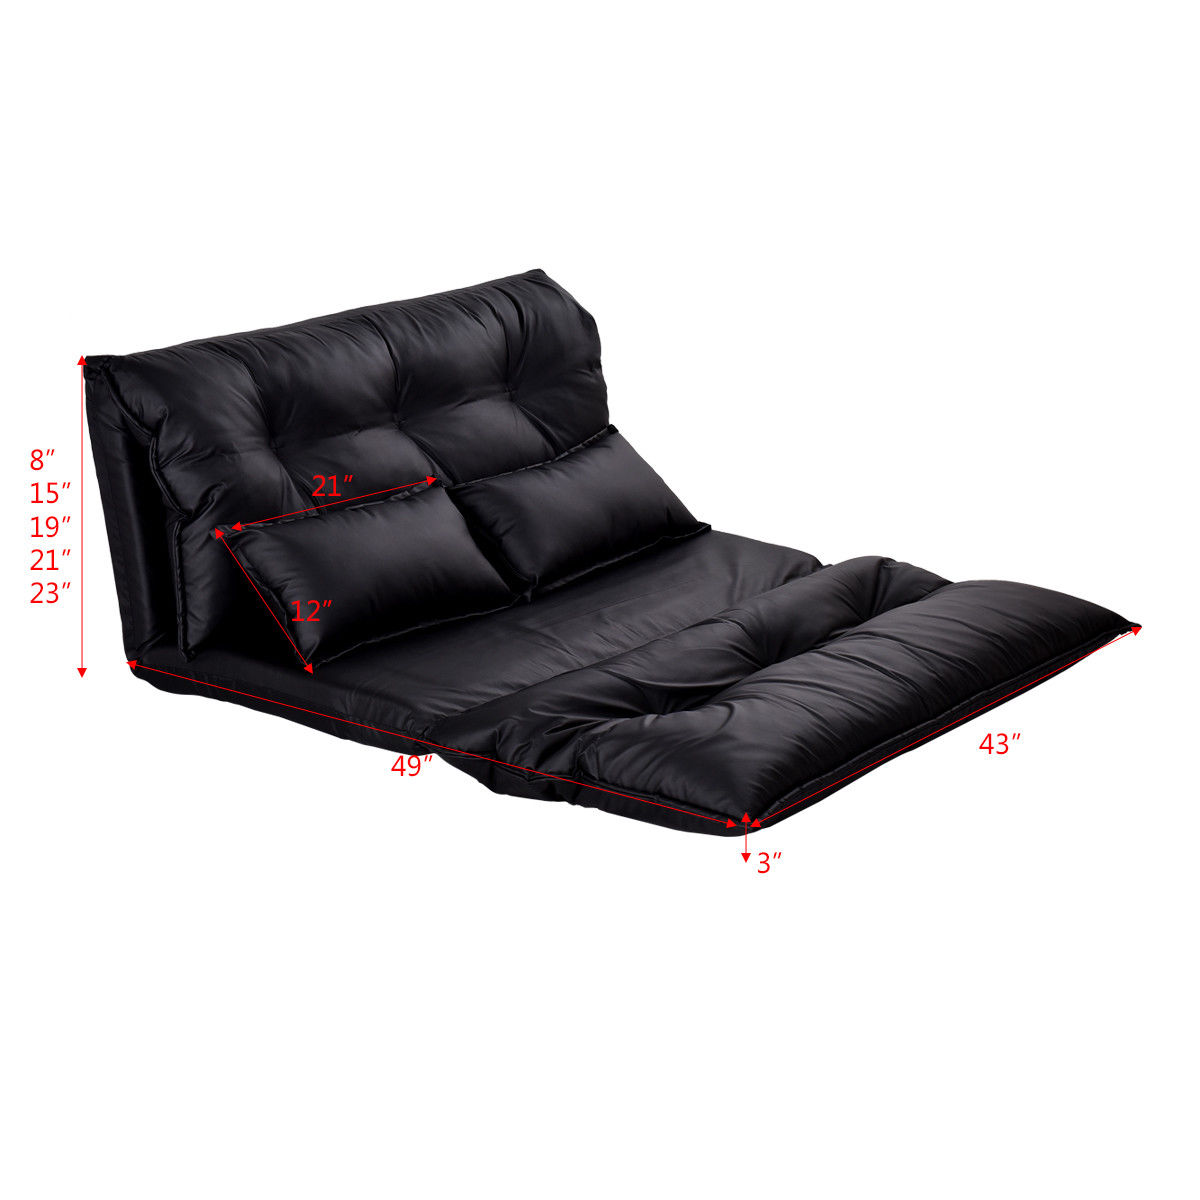 Costway PU Leather Foldable Modern Leisure Floor Sofa Bed Video Gaming 2 Pillows Black - image 7 of 7